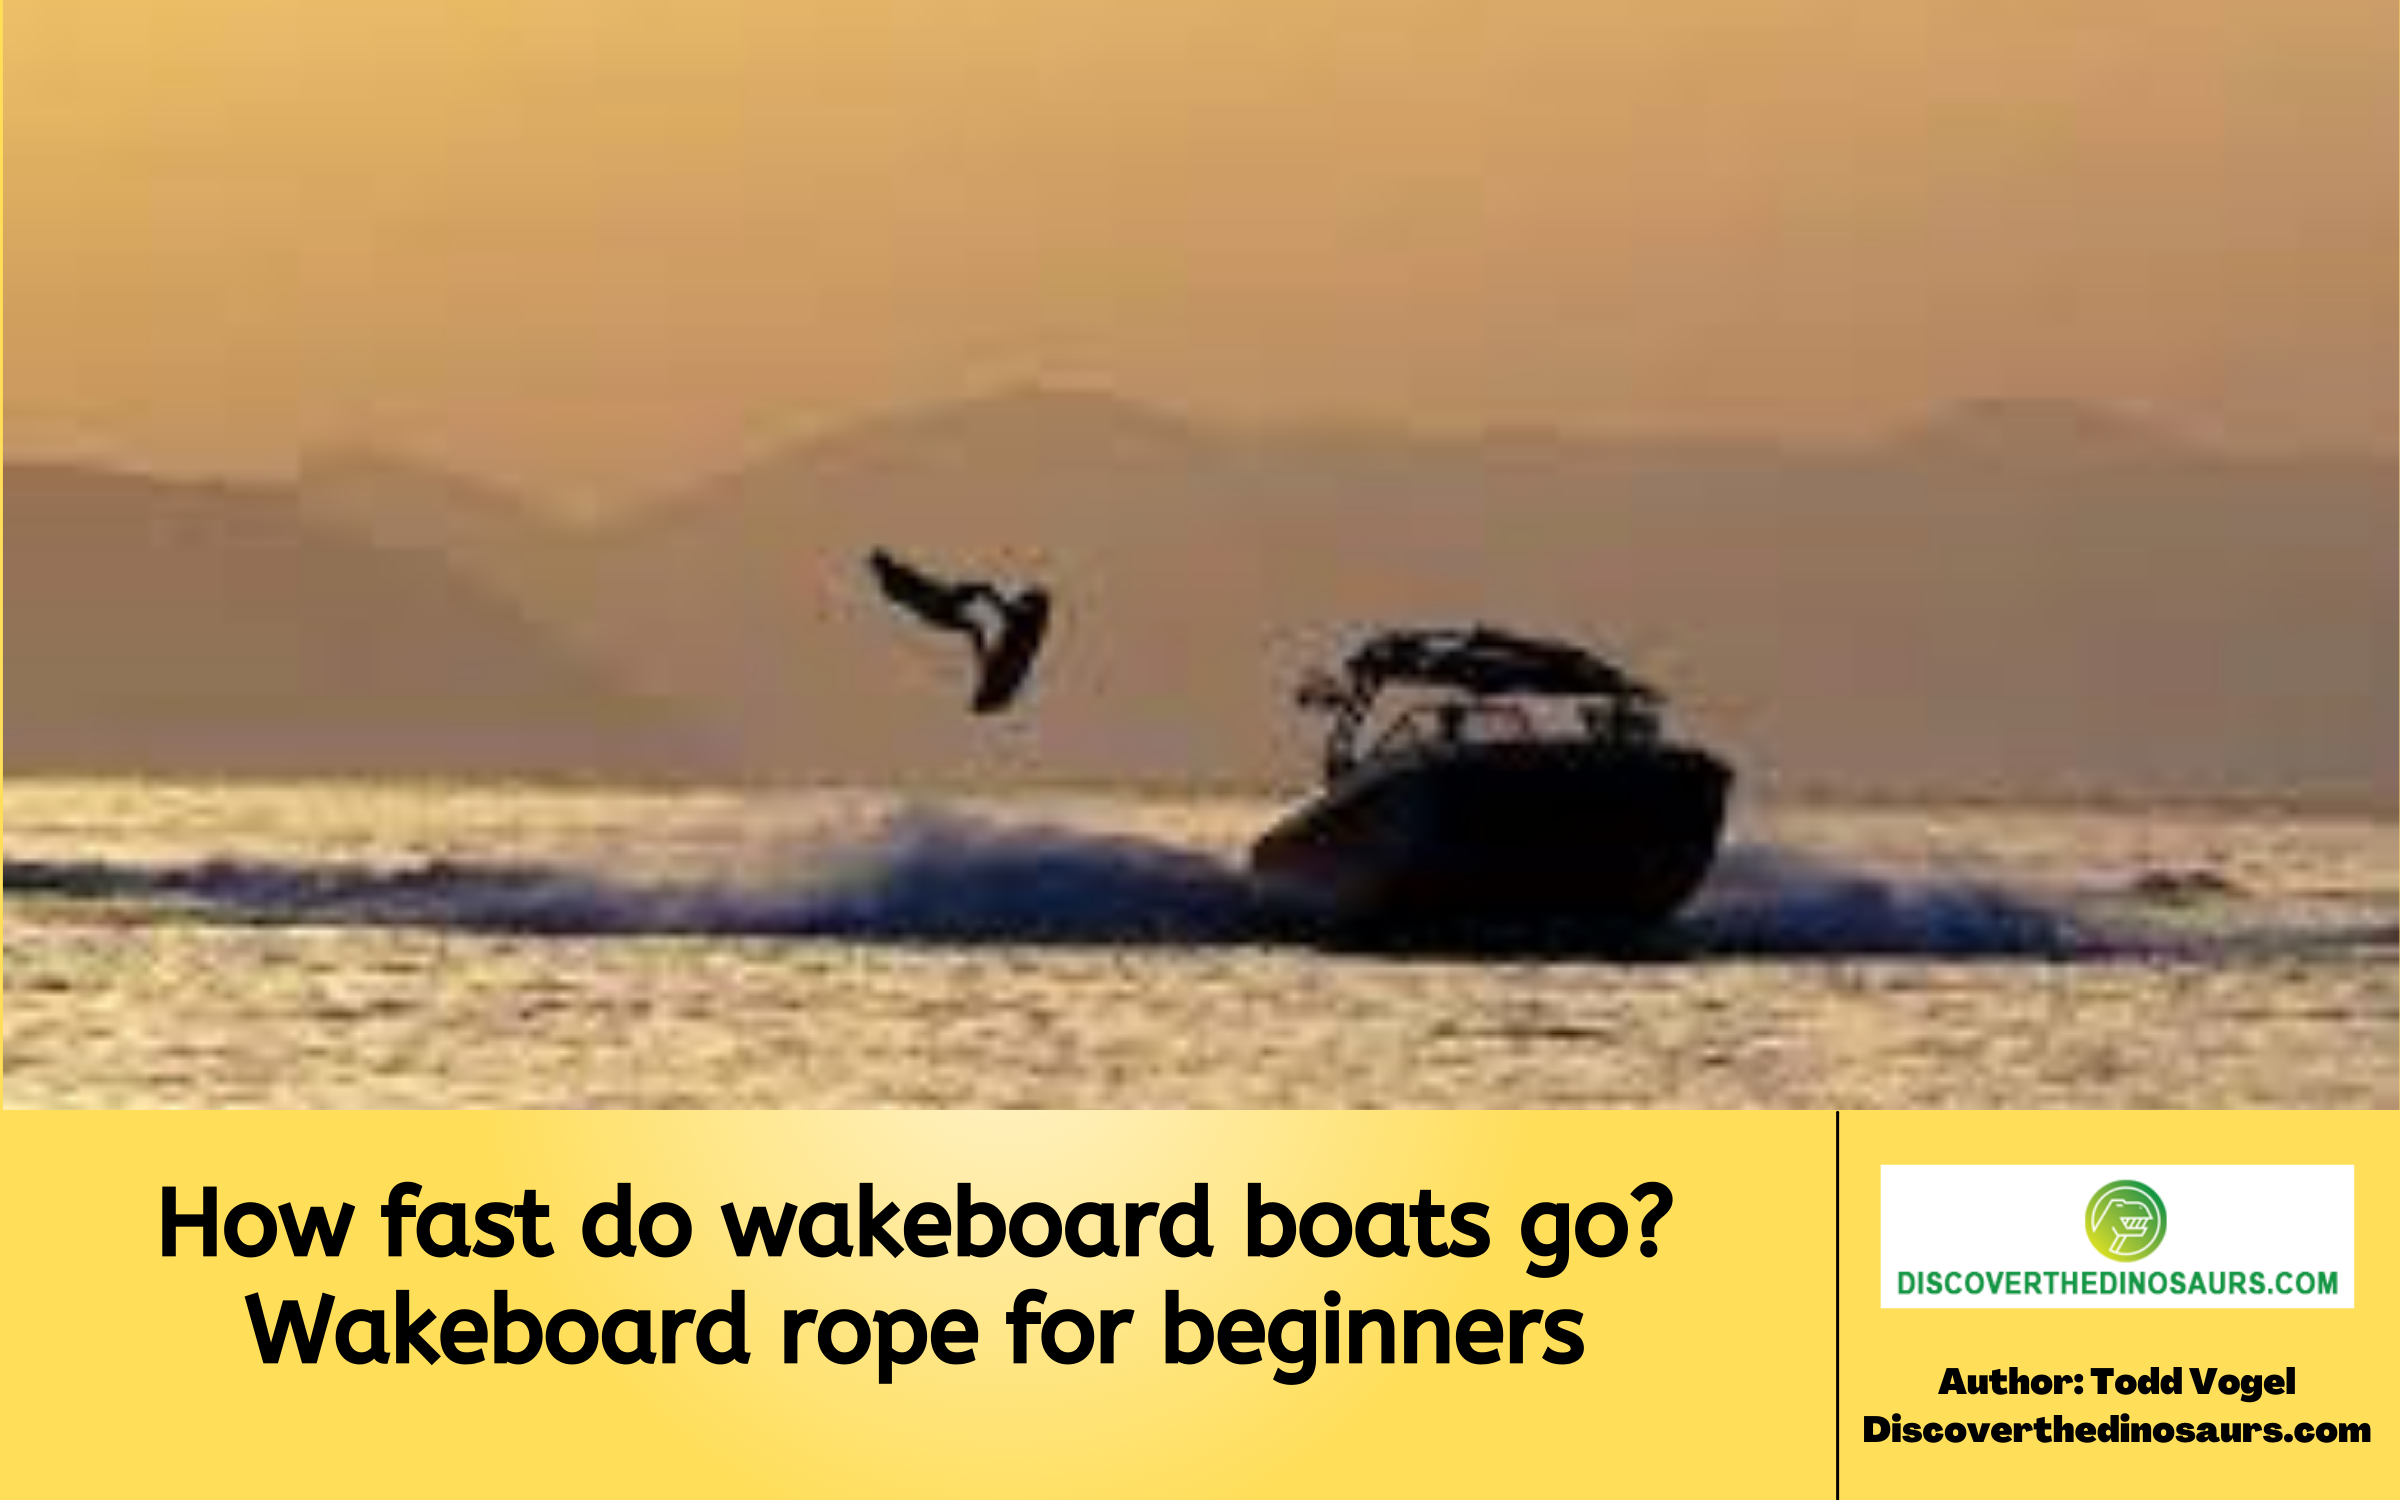 How fast do wakeboard boats go? Wakeboard rope for beginners